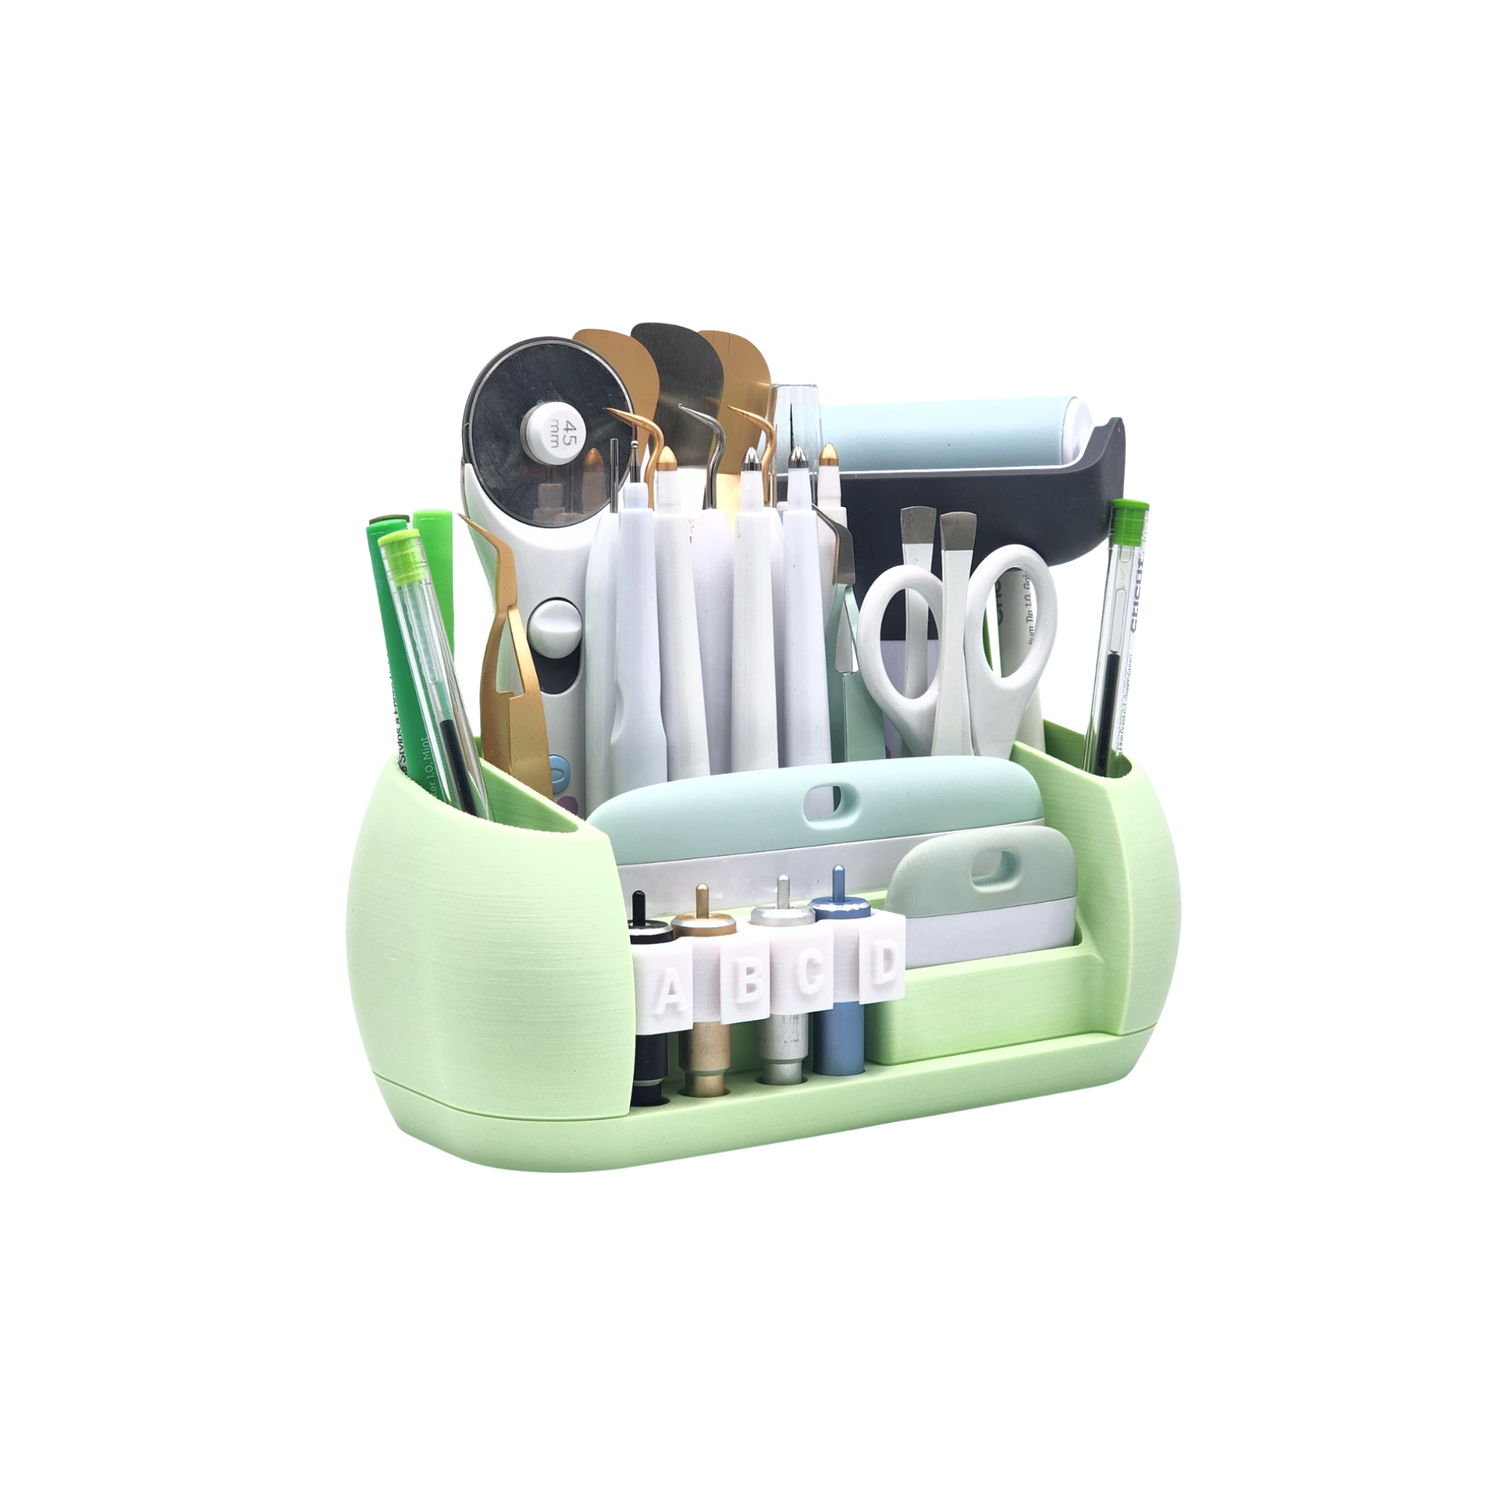 Small Fry 3.0 - Tool Caddy™ / Tool Holder or Organizer for